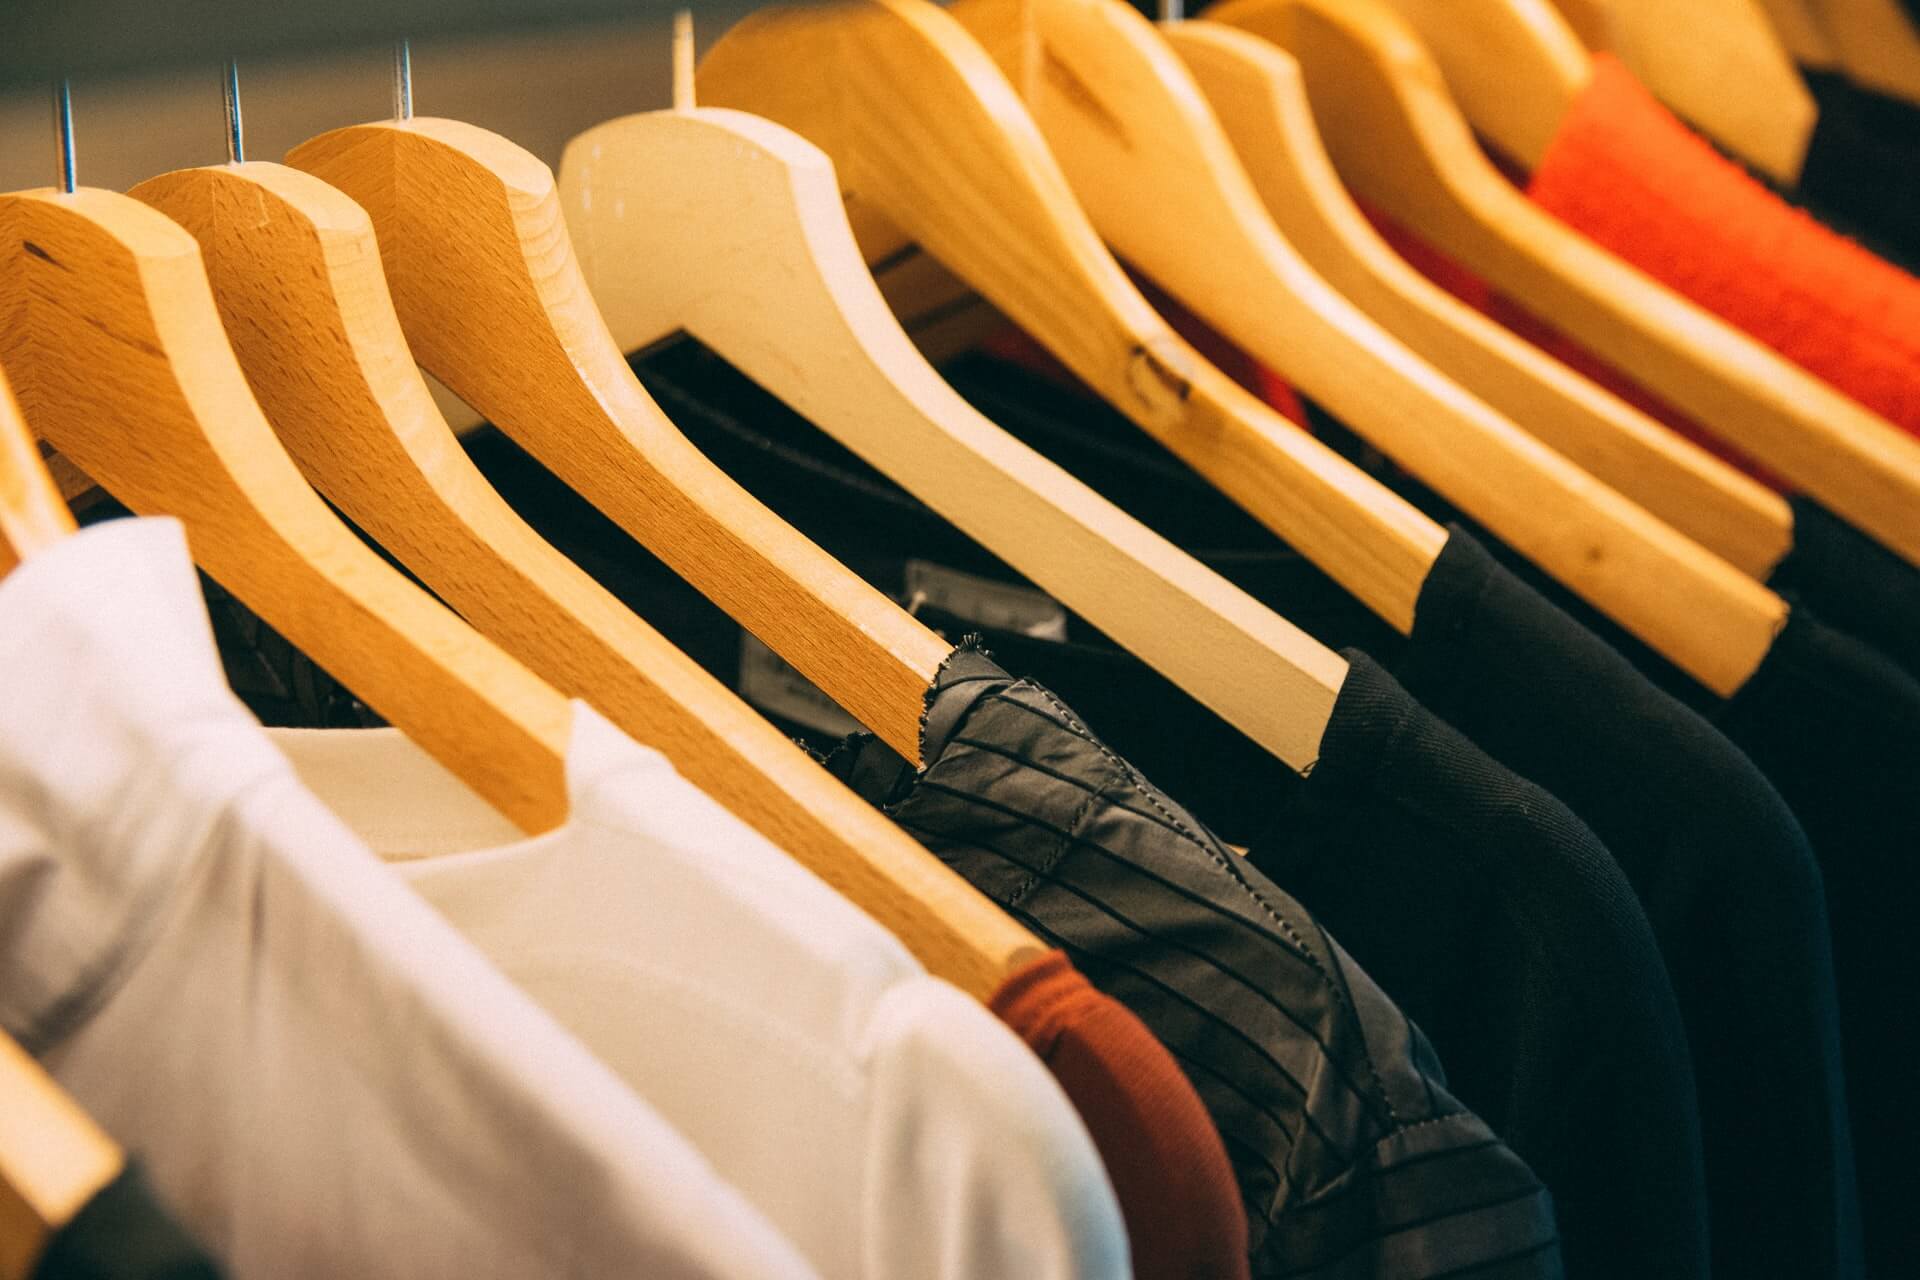 Close-up of wooden hangers with shirts hanging on them